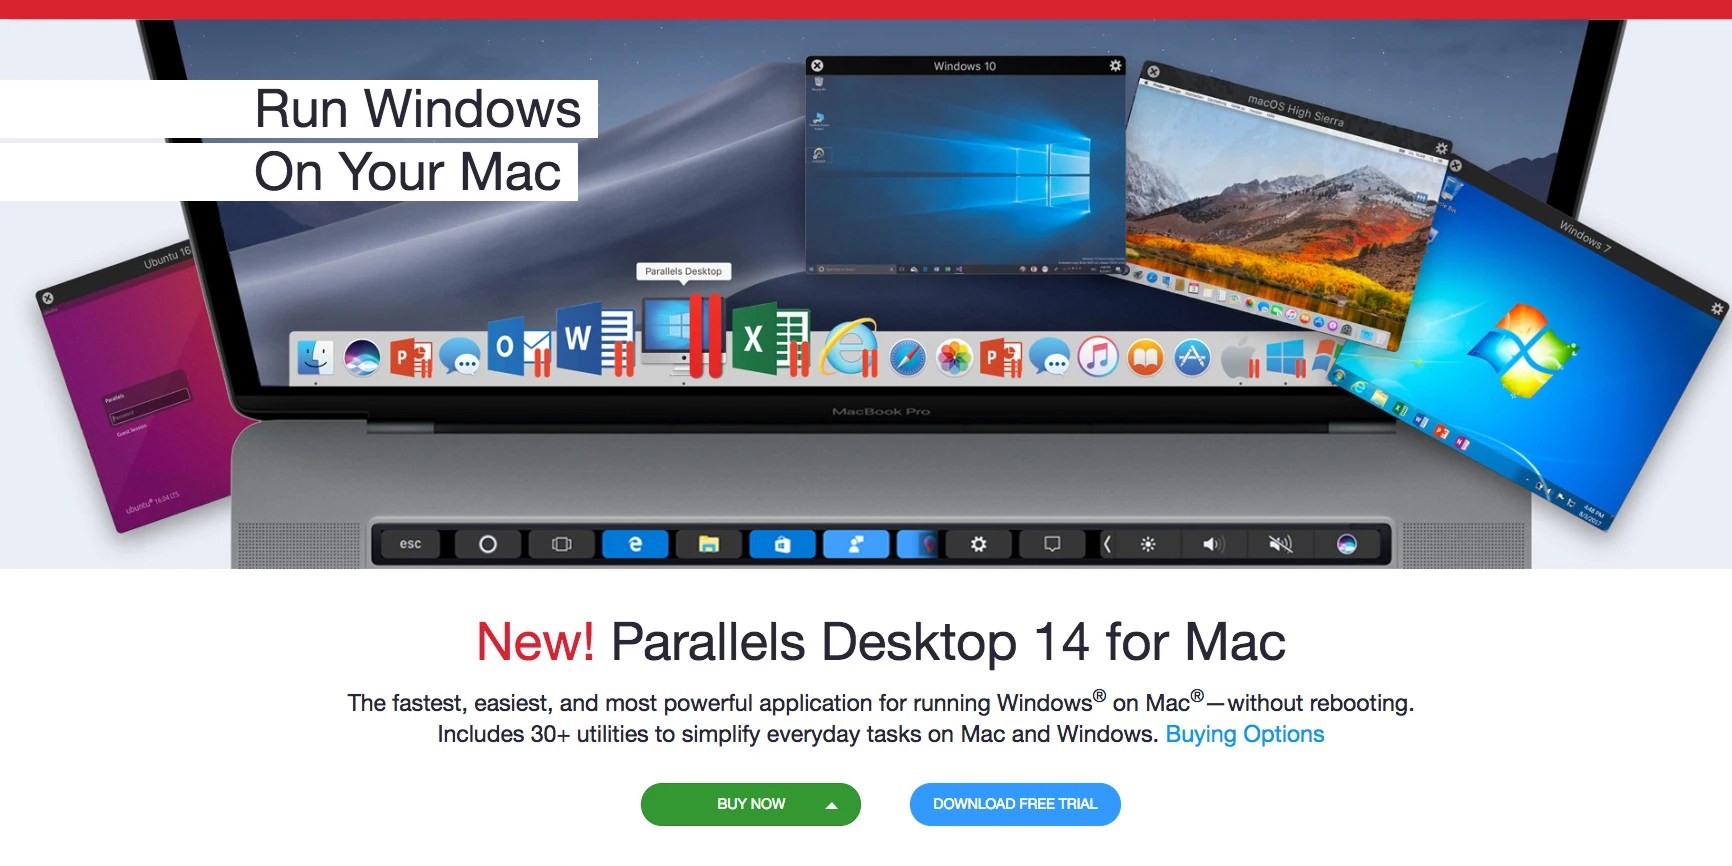 download windows 10 free for mac using parallels